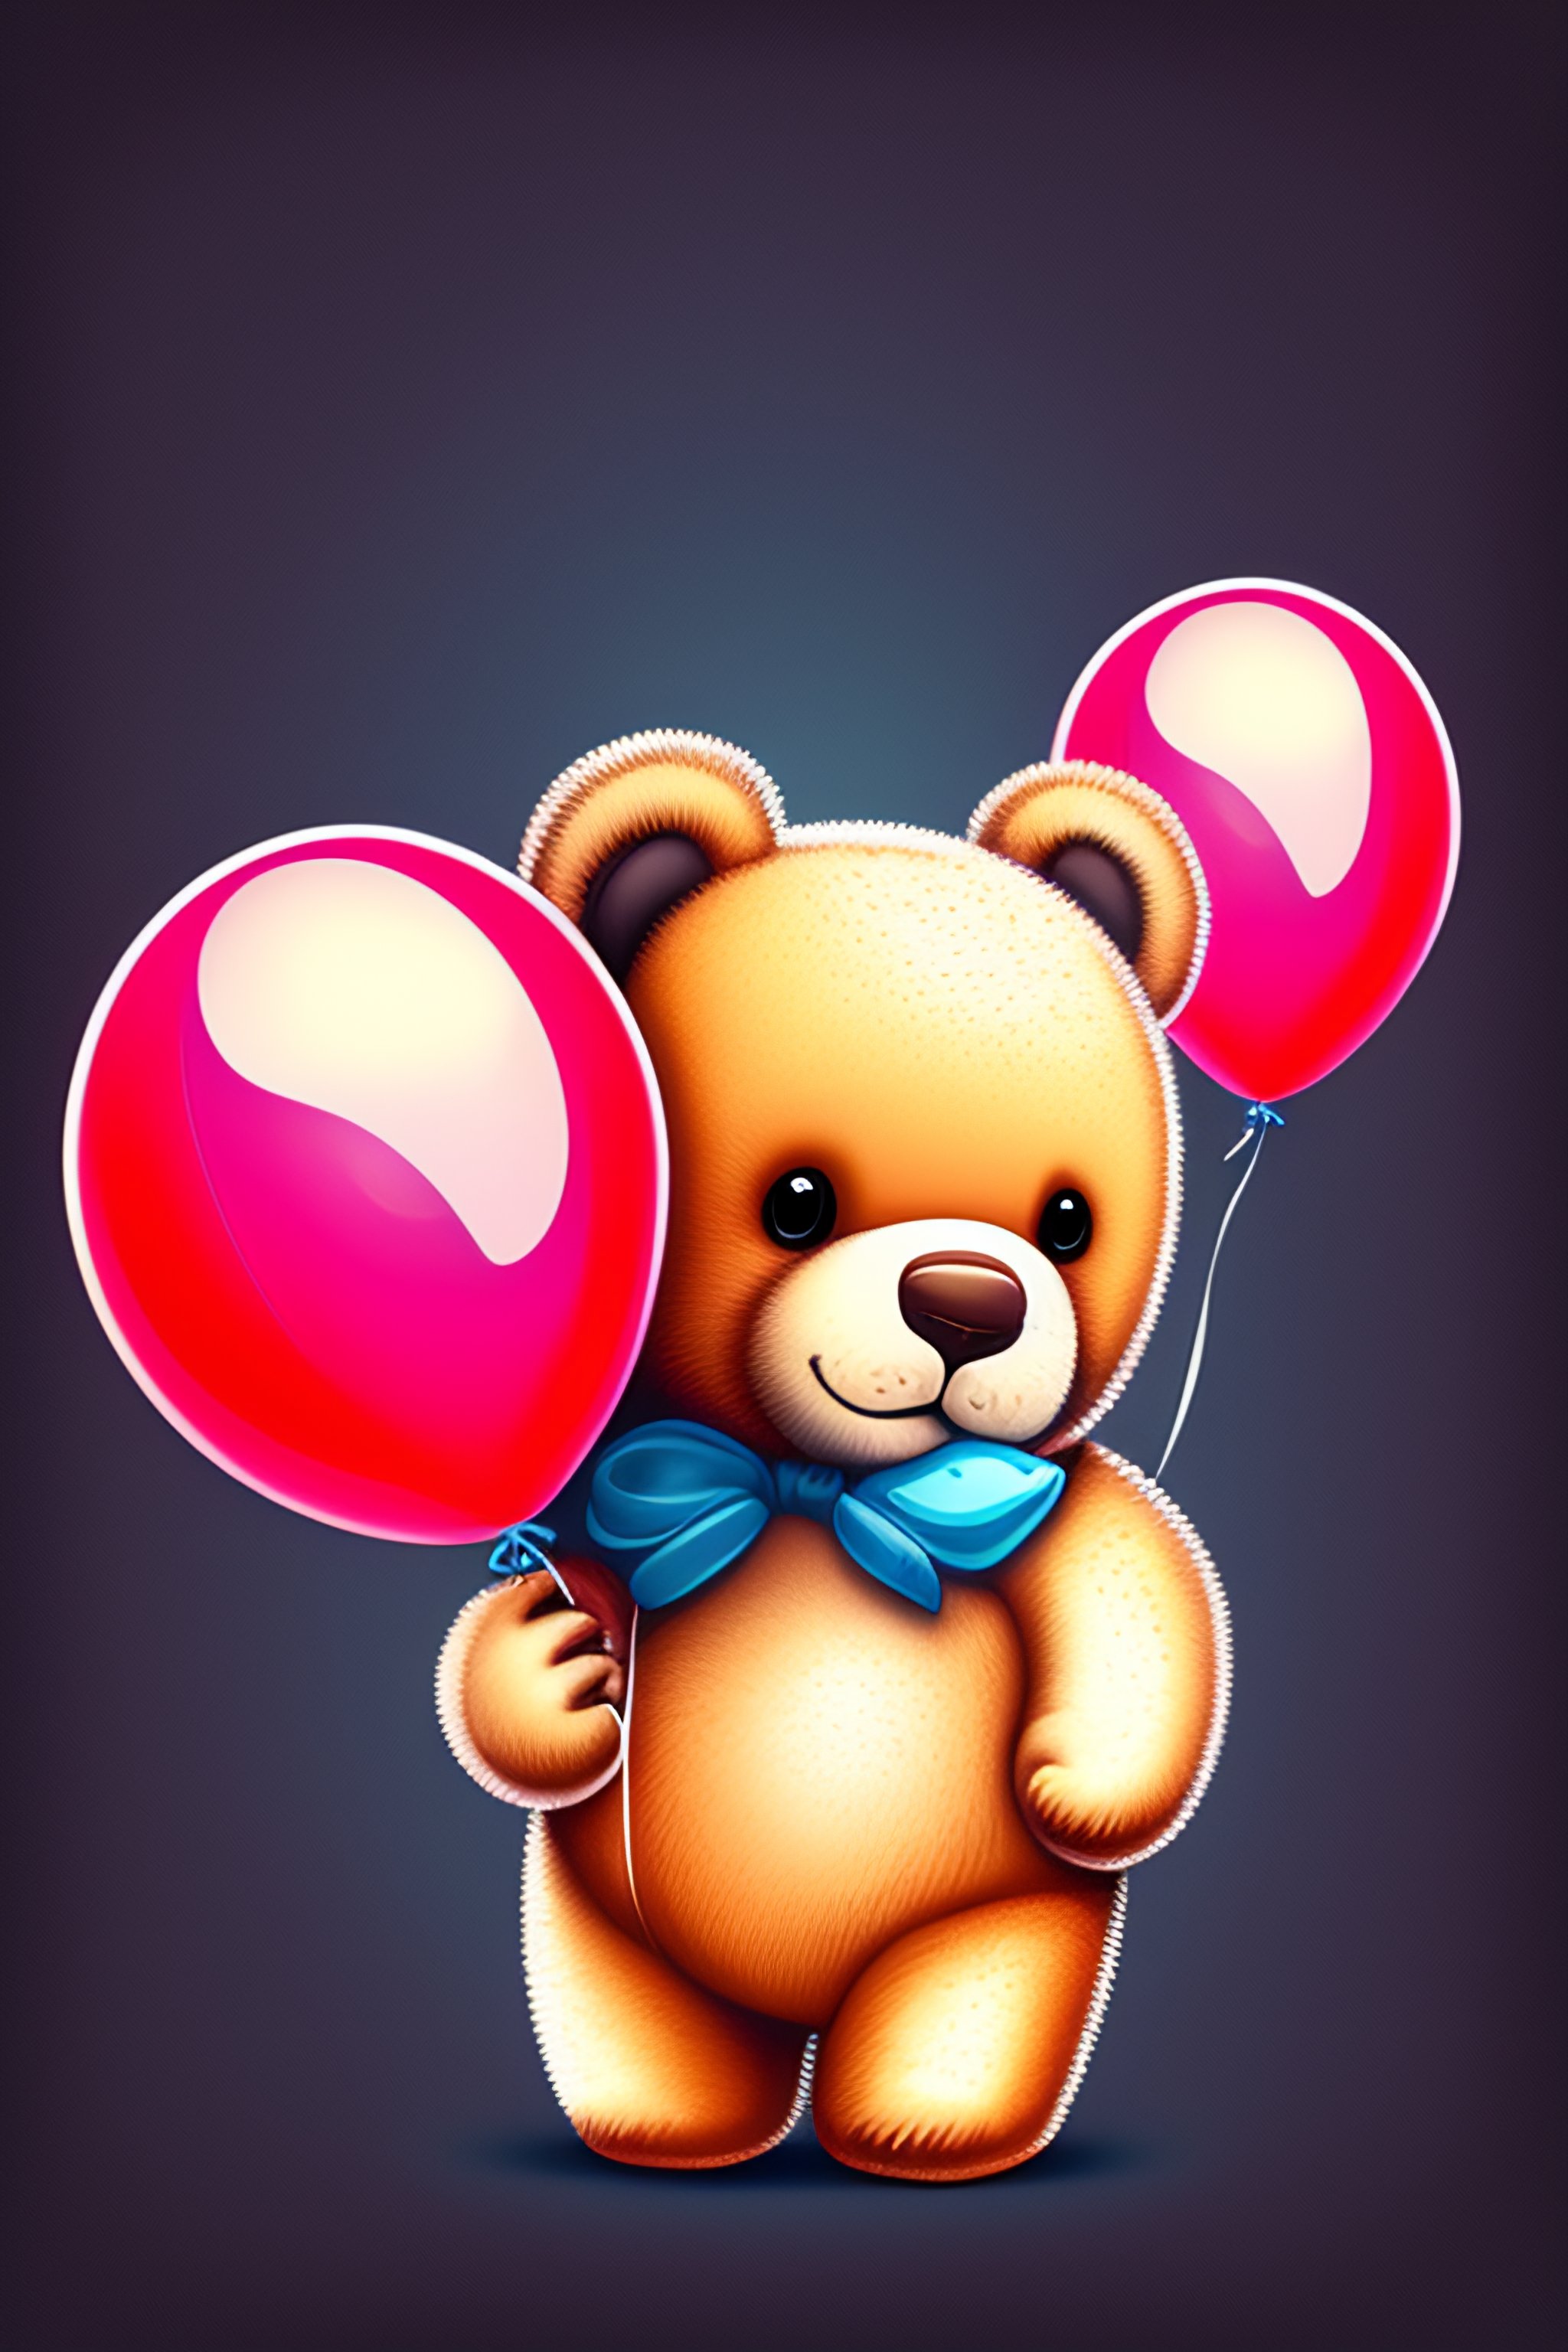 Lexica Illustration sketch of a teddy bear holding balloons, flat